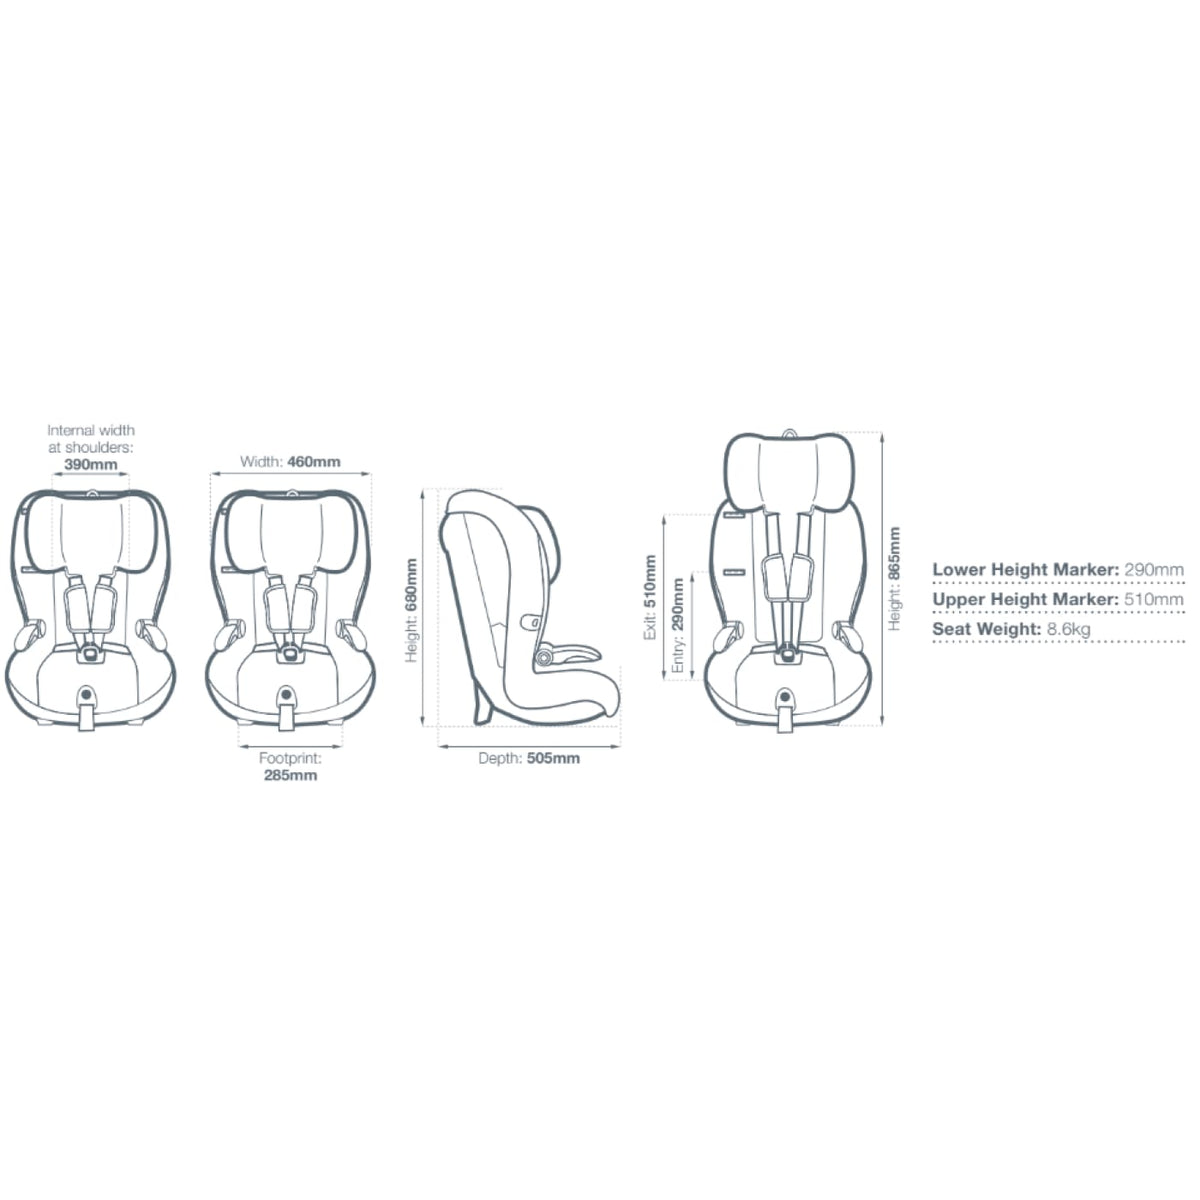 Britax Maxi Guard Pro Tex - 6 Months - 8 Years - CAR SEATS - HARNESSED BOOSTERS (6M-8YR)